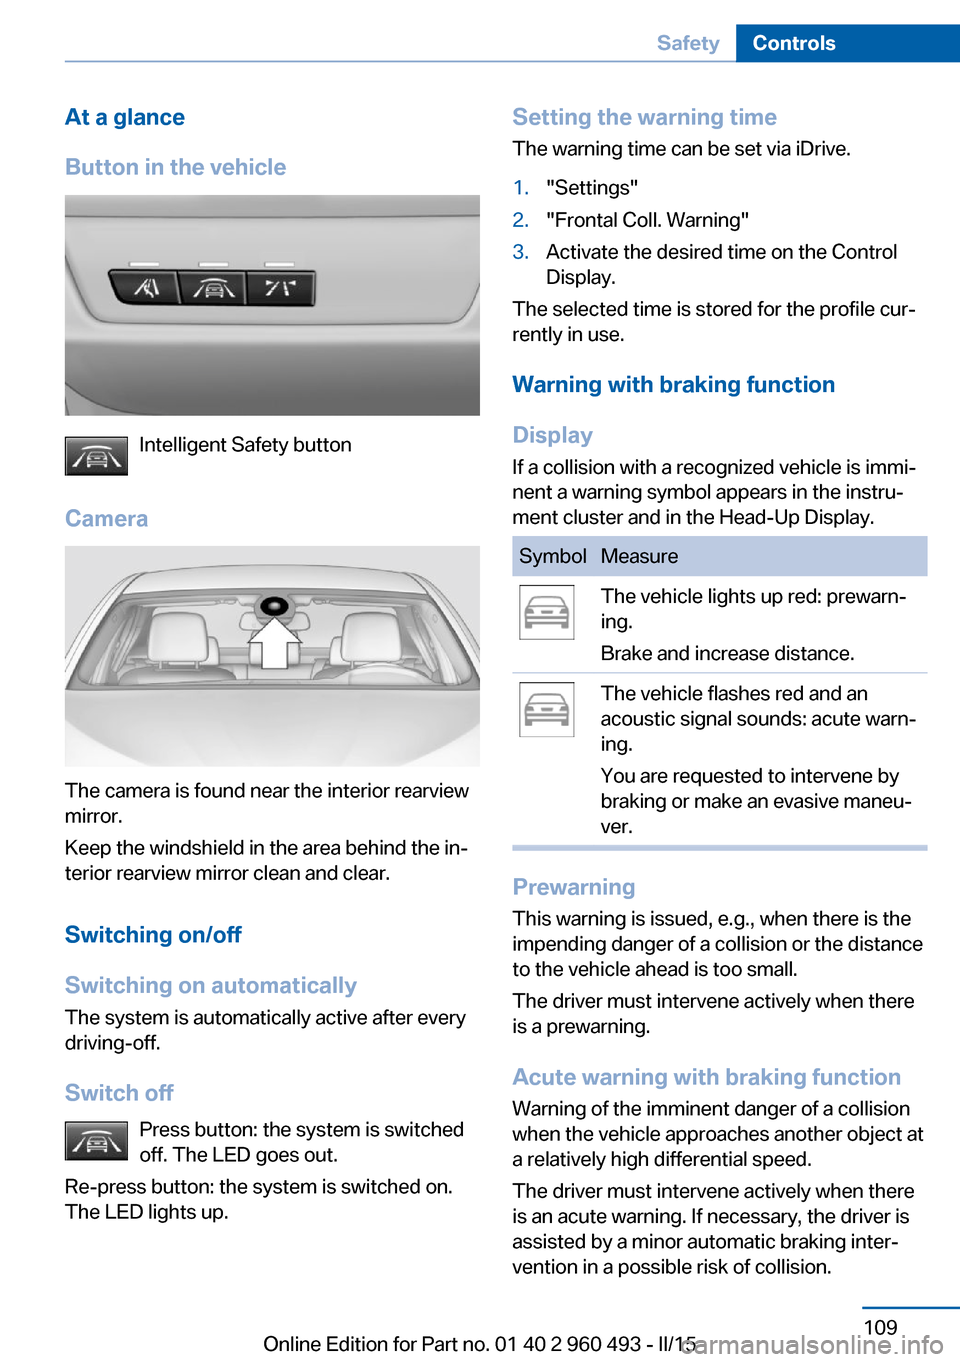 BMW 3 SERIES SPORTS WAGON 2015 F31 User Guide At a glance
Button in the vehicle
Intelligent Safety button
Camera
The camera is found near the interior rearview
mirror.
Keep the windshield in the area behind the in‐
terior rearview mirror clean 